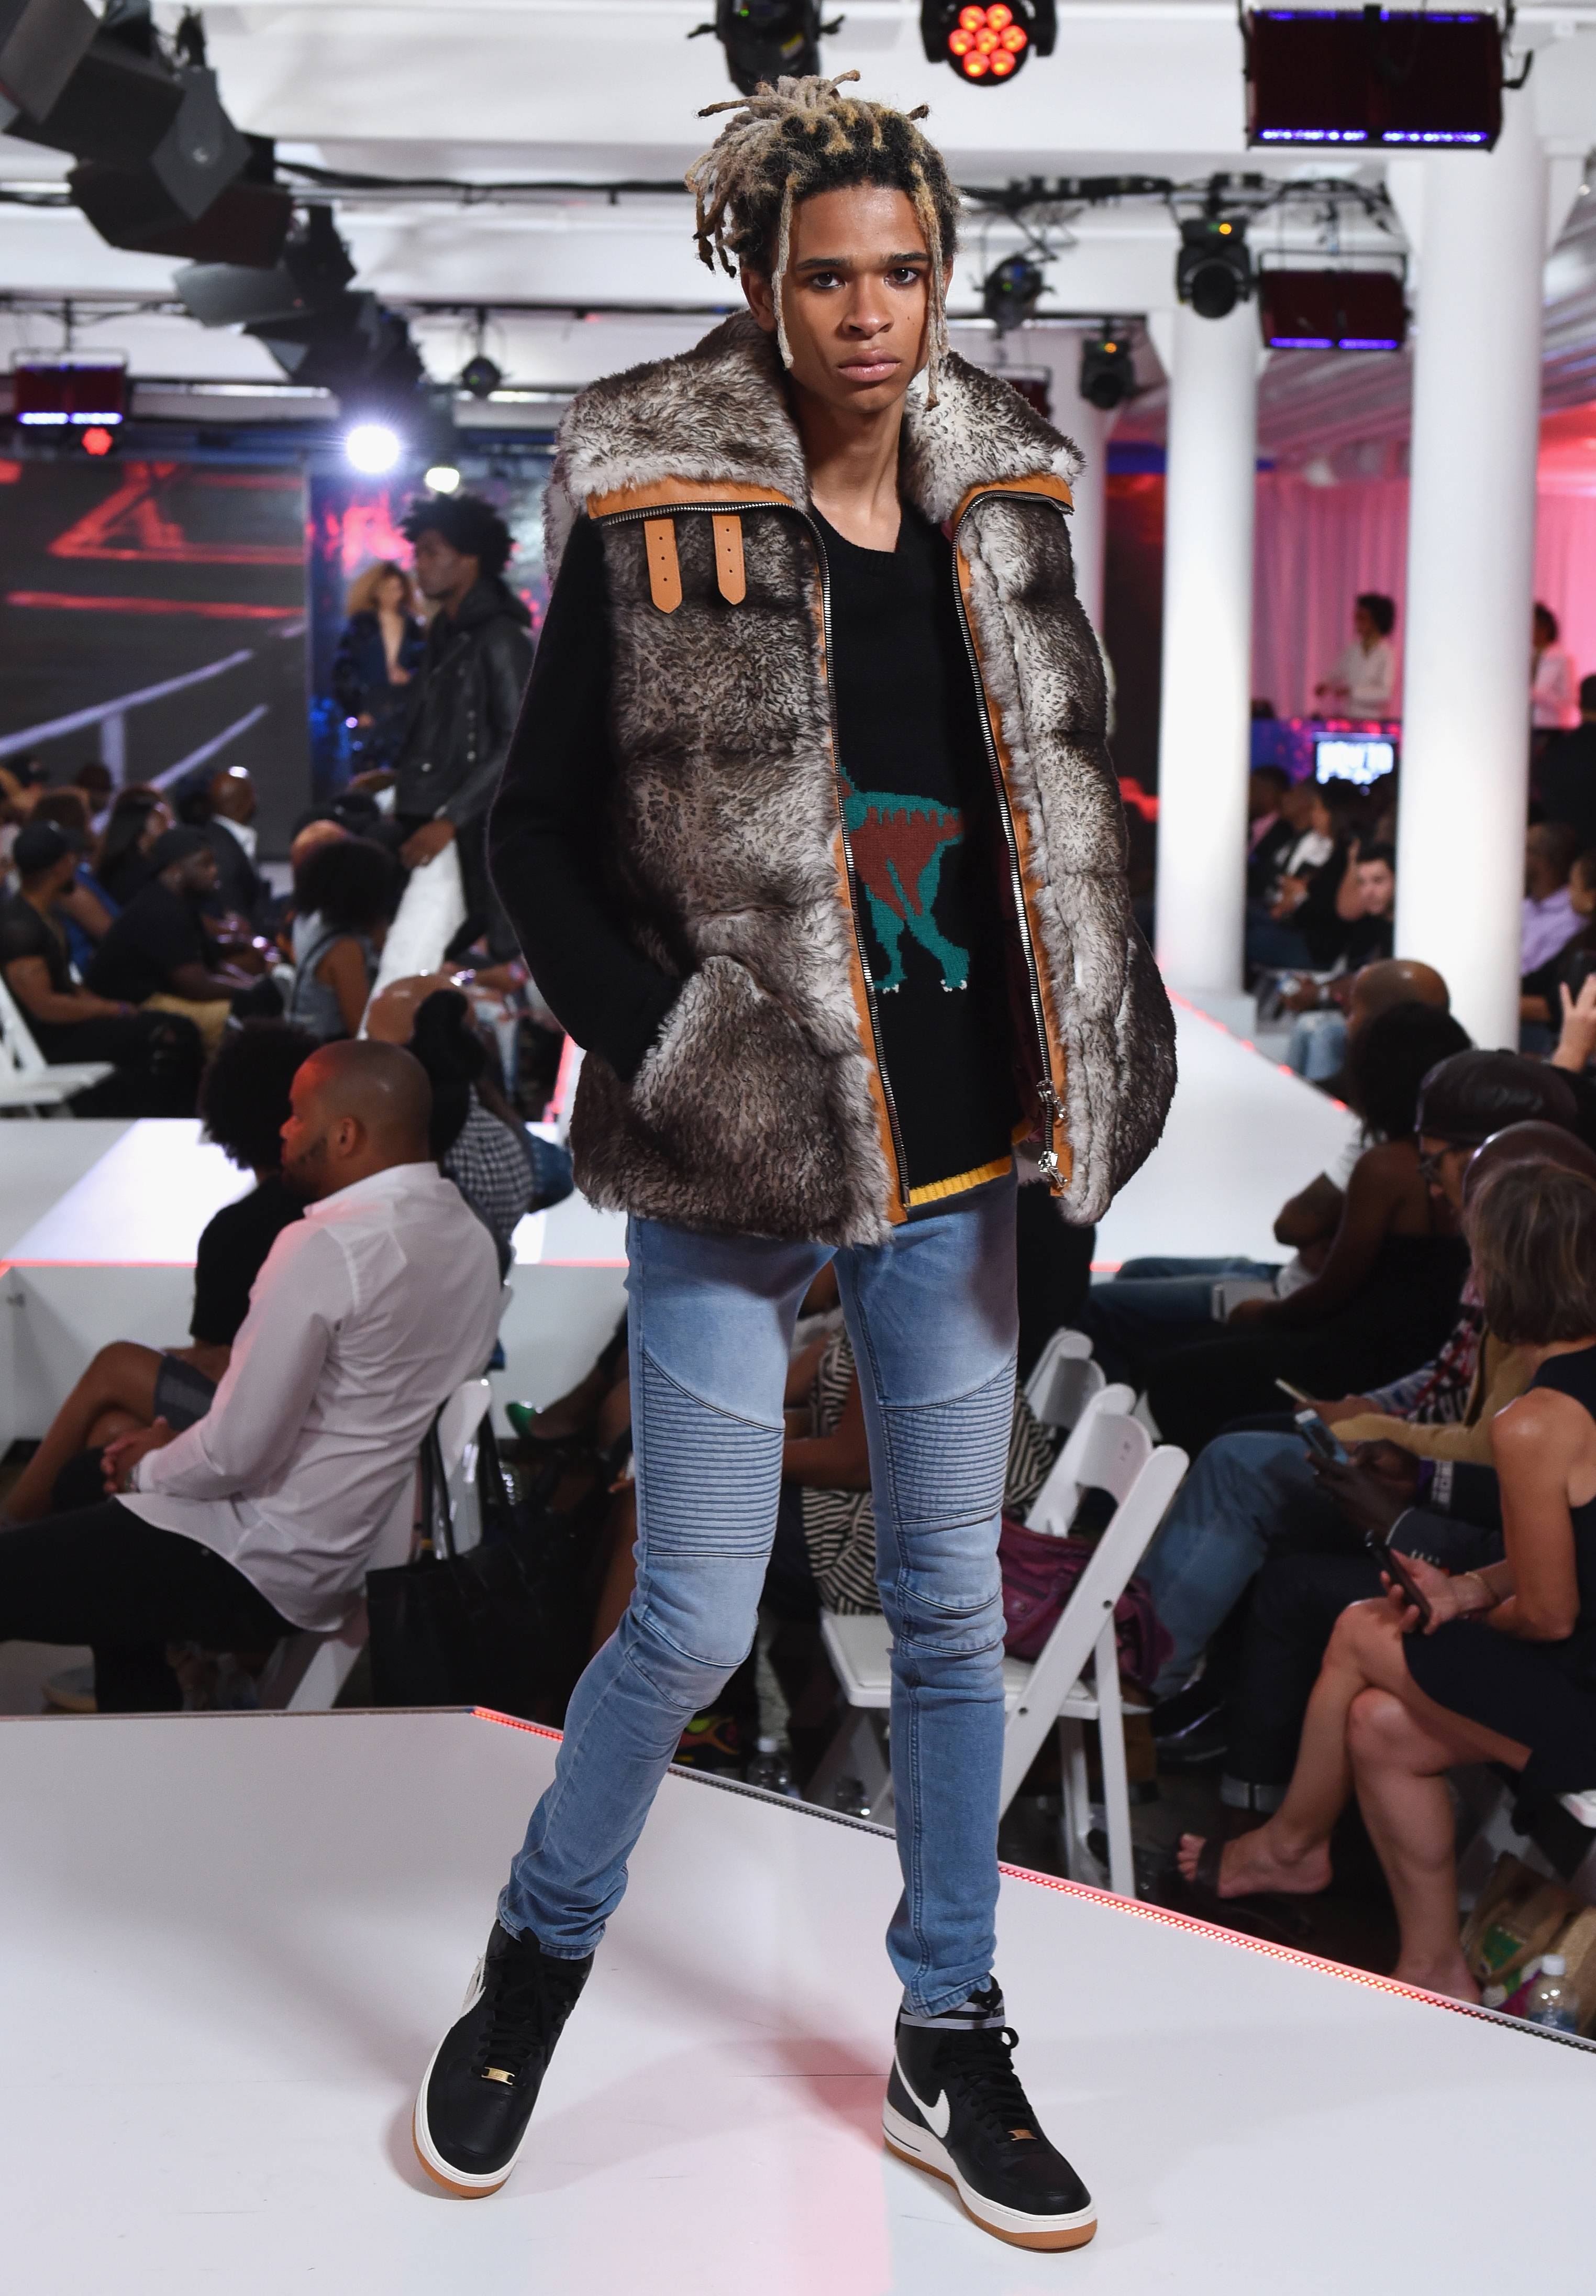 Fashionable People Never Ride Coach, They Just Wear It&nbsp; - Model Josh rocks Coach from head to toe with this two-tone fur vest, sweater and sneakers. We cannot get enough of his flyness.(Photo: Noam Galai/Getty Images for BET Networks)&nbsp;